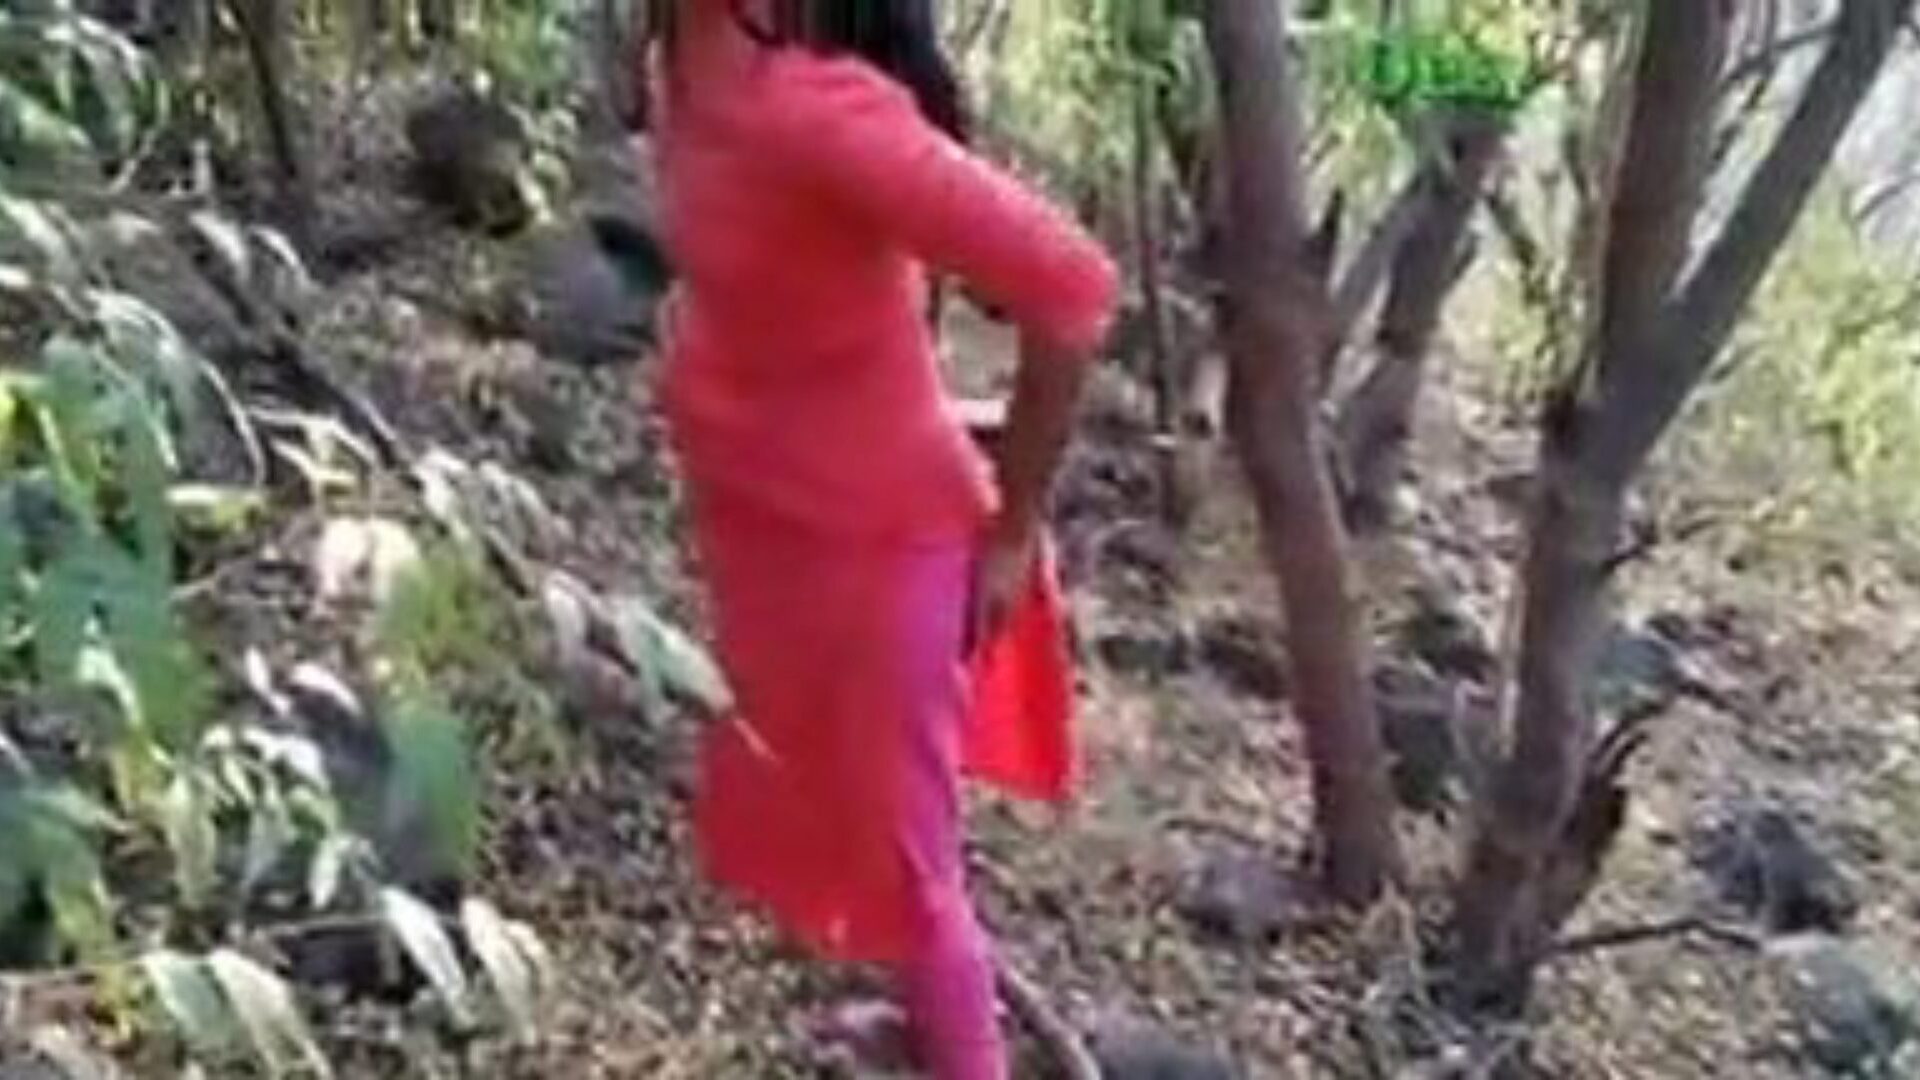 Desi Girlfriend Fuck in Jungle, Free Indian Porn Video f0 Watch Desi Girlfriend Fuck in Jungle clip on xHamster, the thickest fuckfest tube web page with tons of free-for-all Indian Hardcore & Squirting porn movie scenes